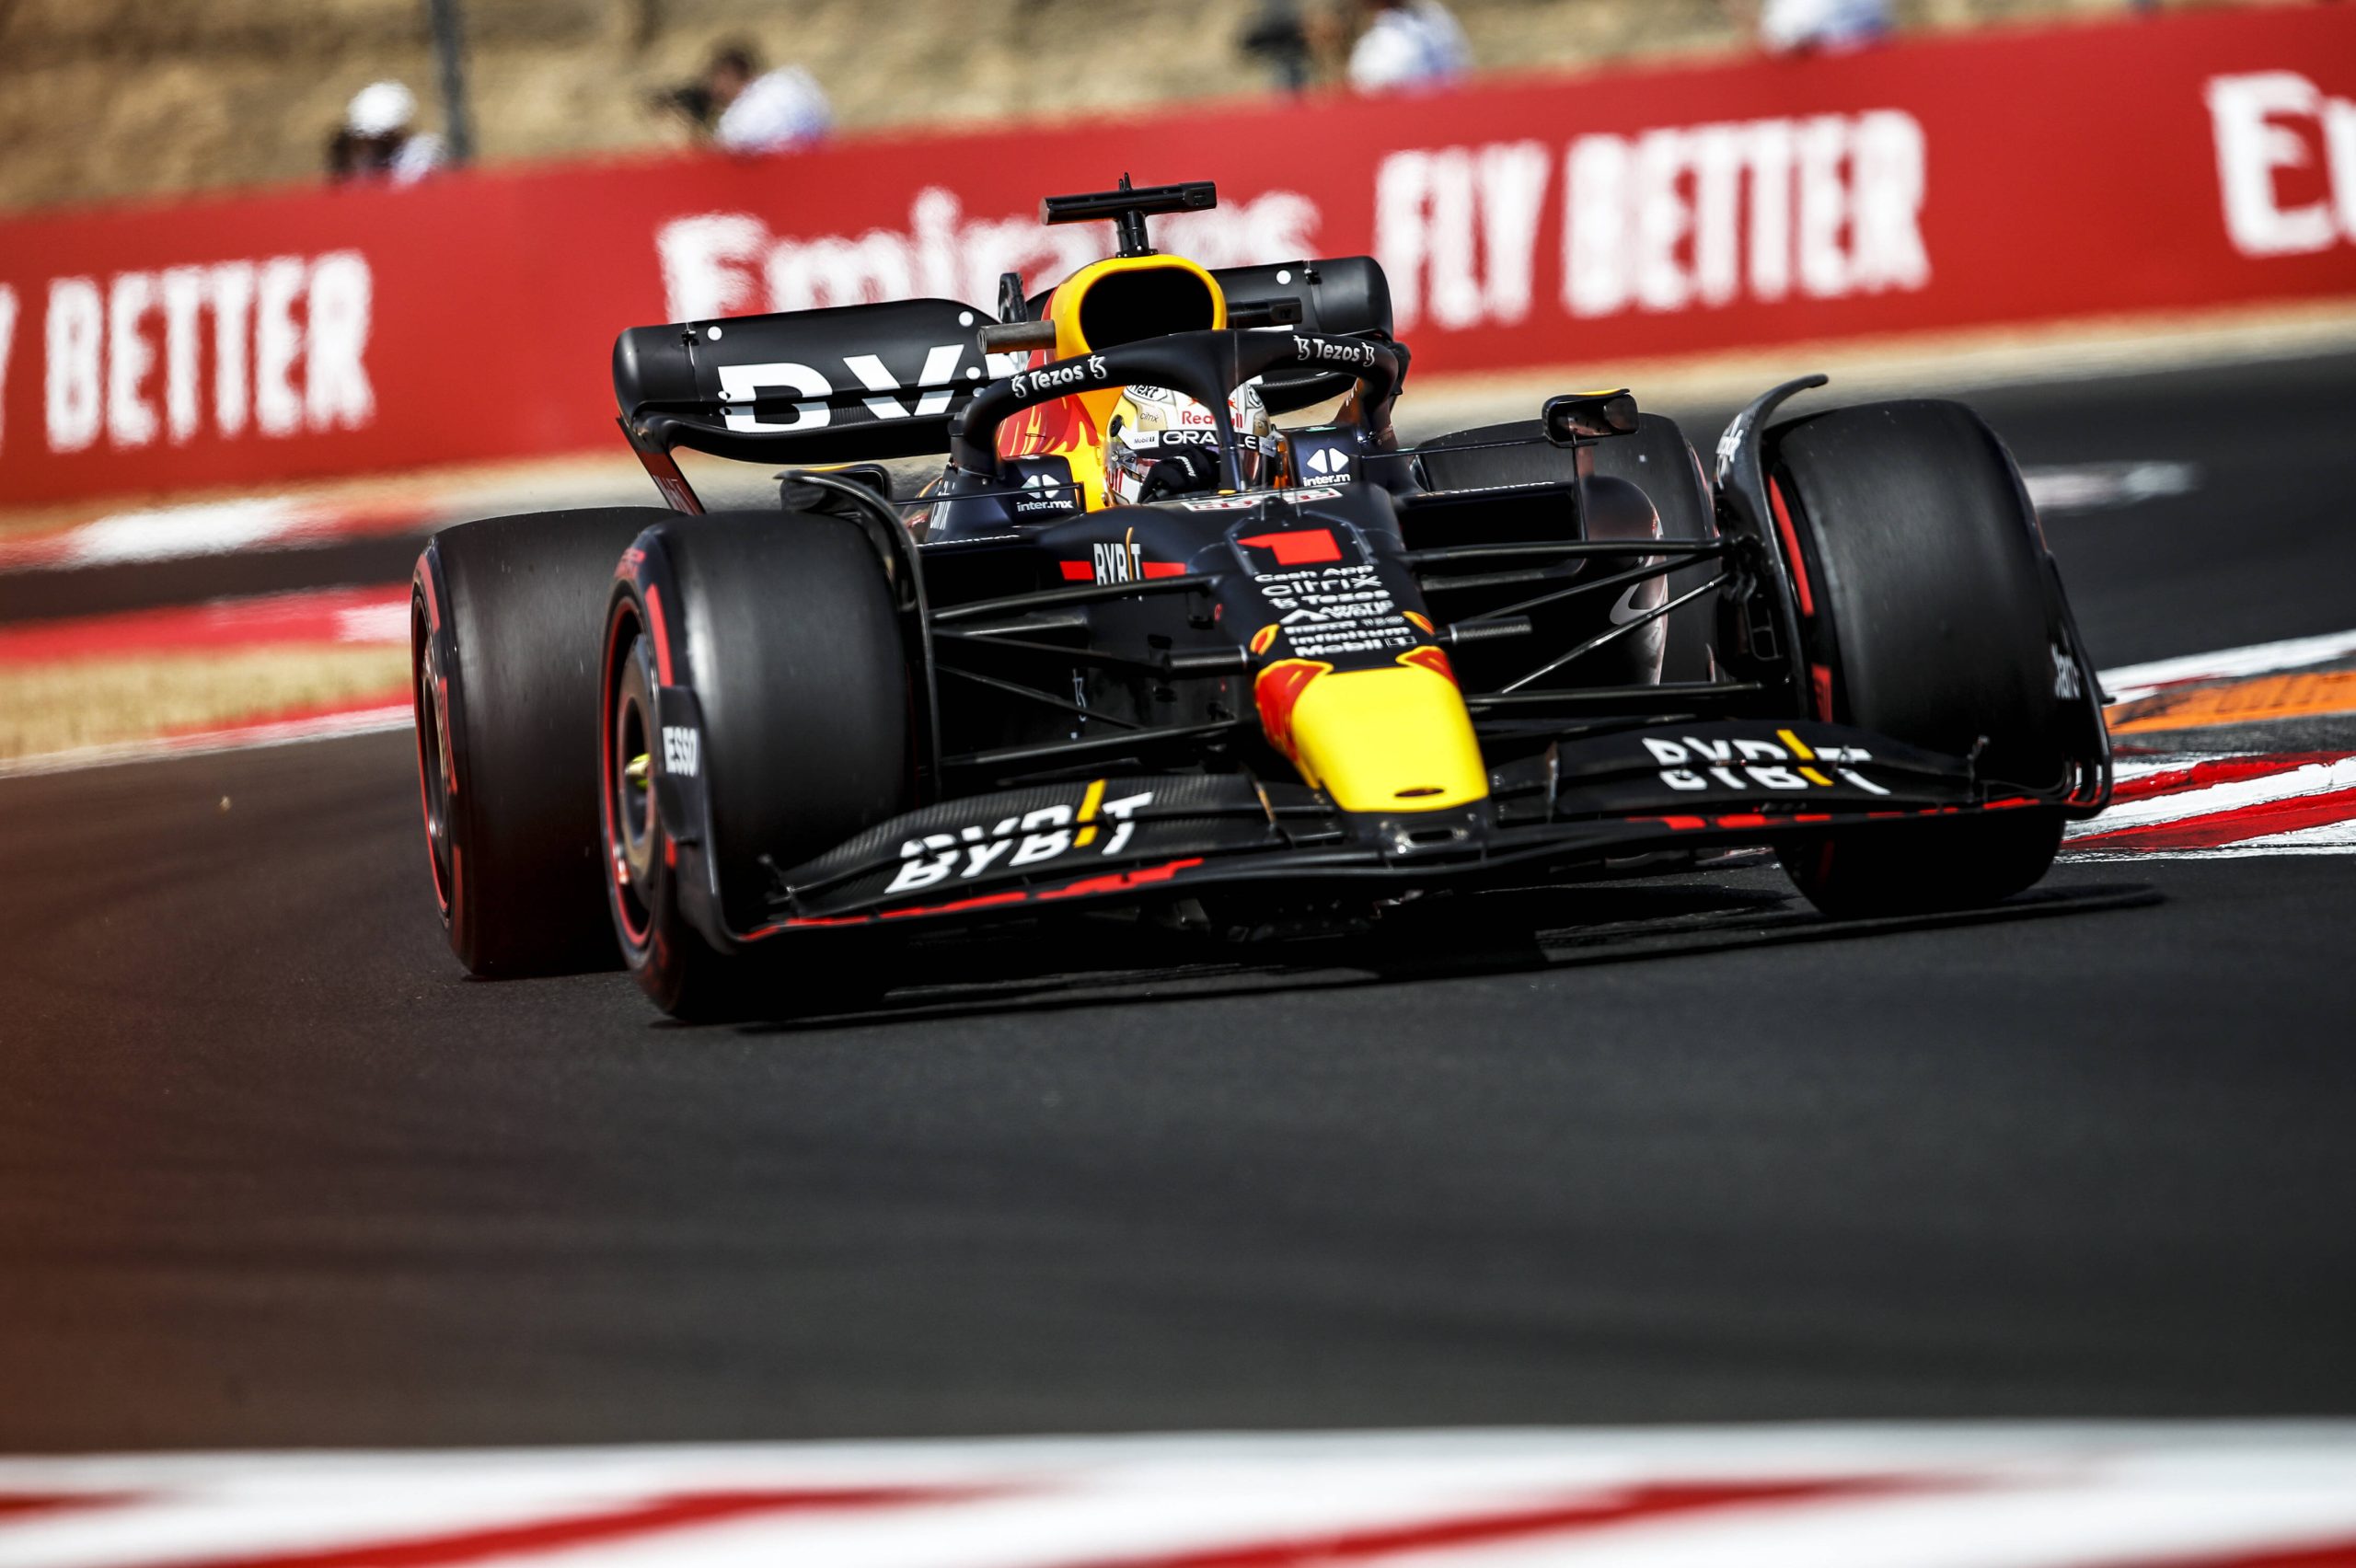 Porsche presents its plans for Formula 1 with Red Bull